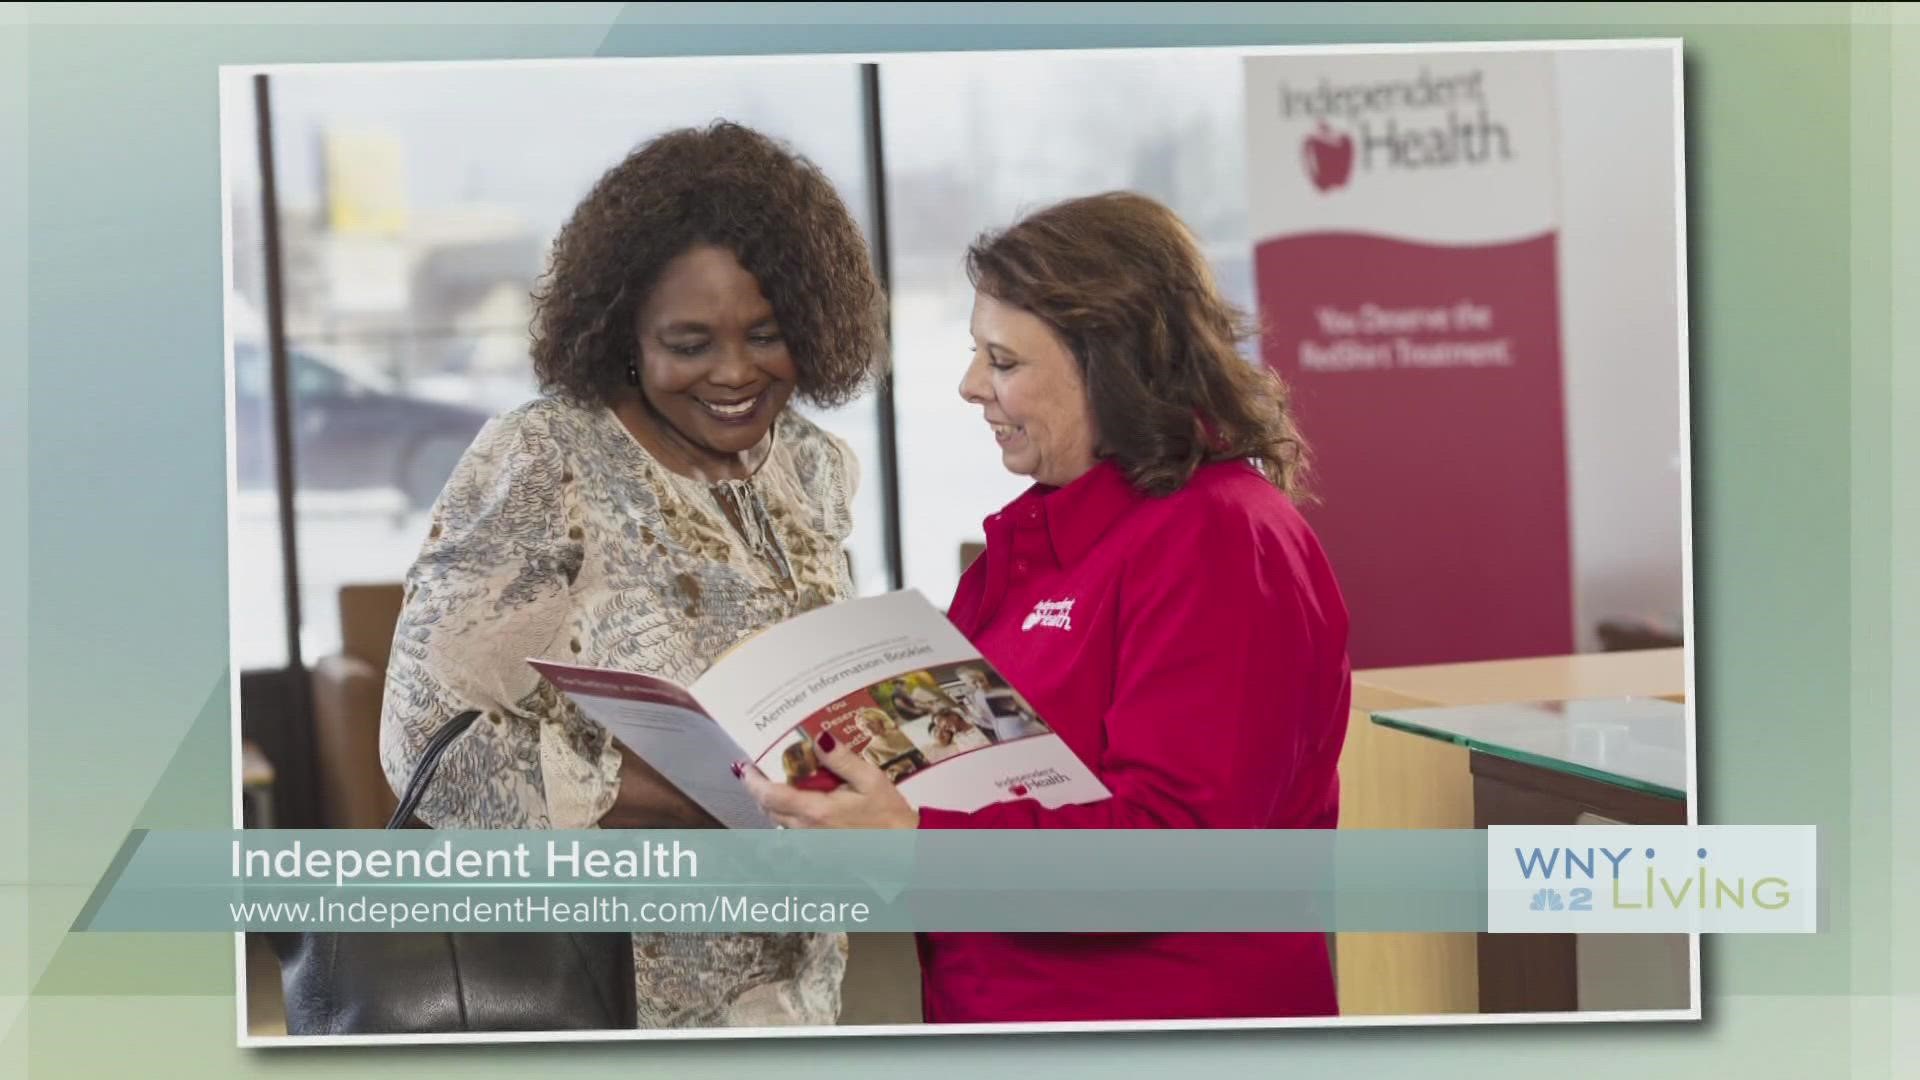 WNY Living - November 5 - Independent Health (THIS VIDEO IS SPONSORED BY INDEPENDENT HEALTH)